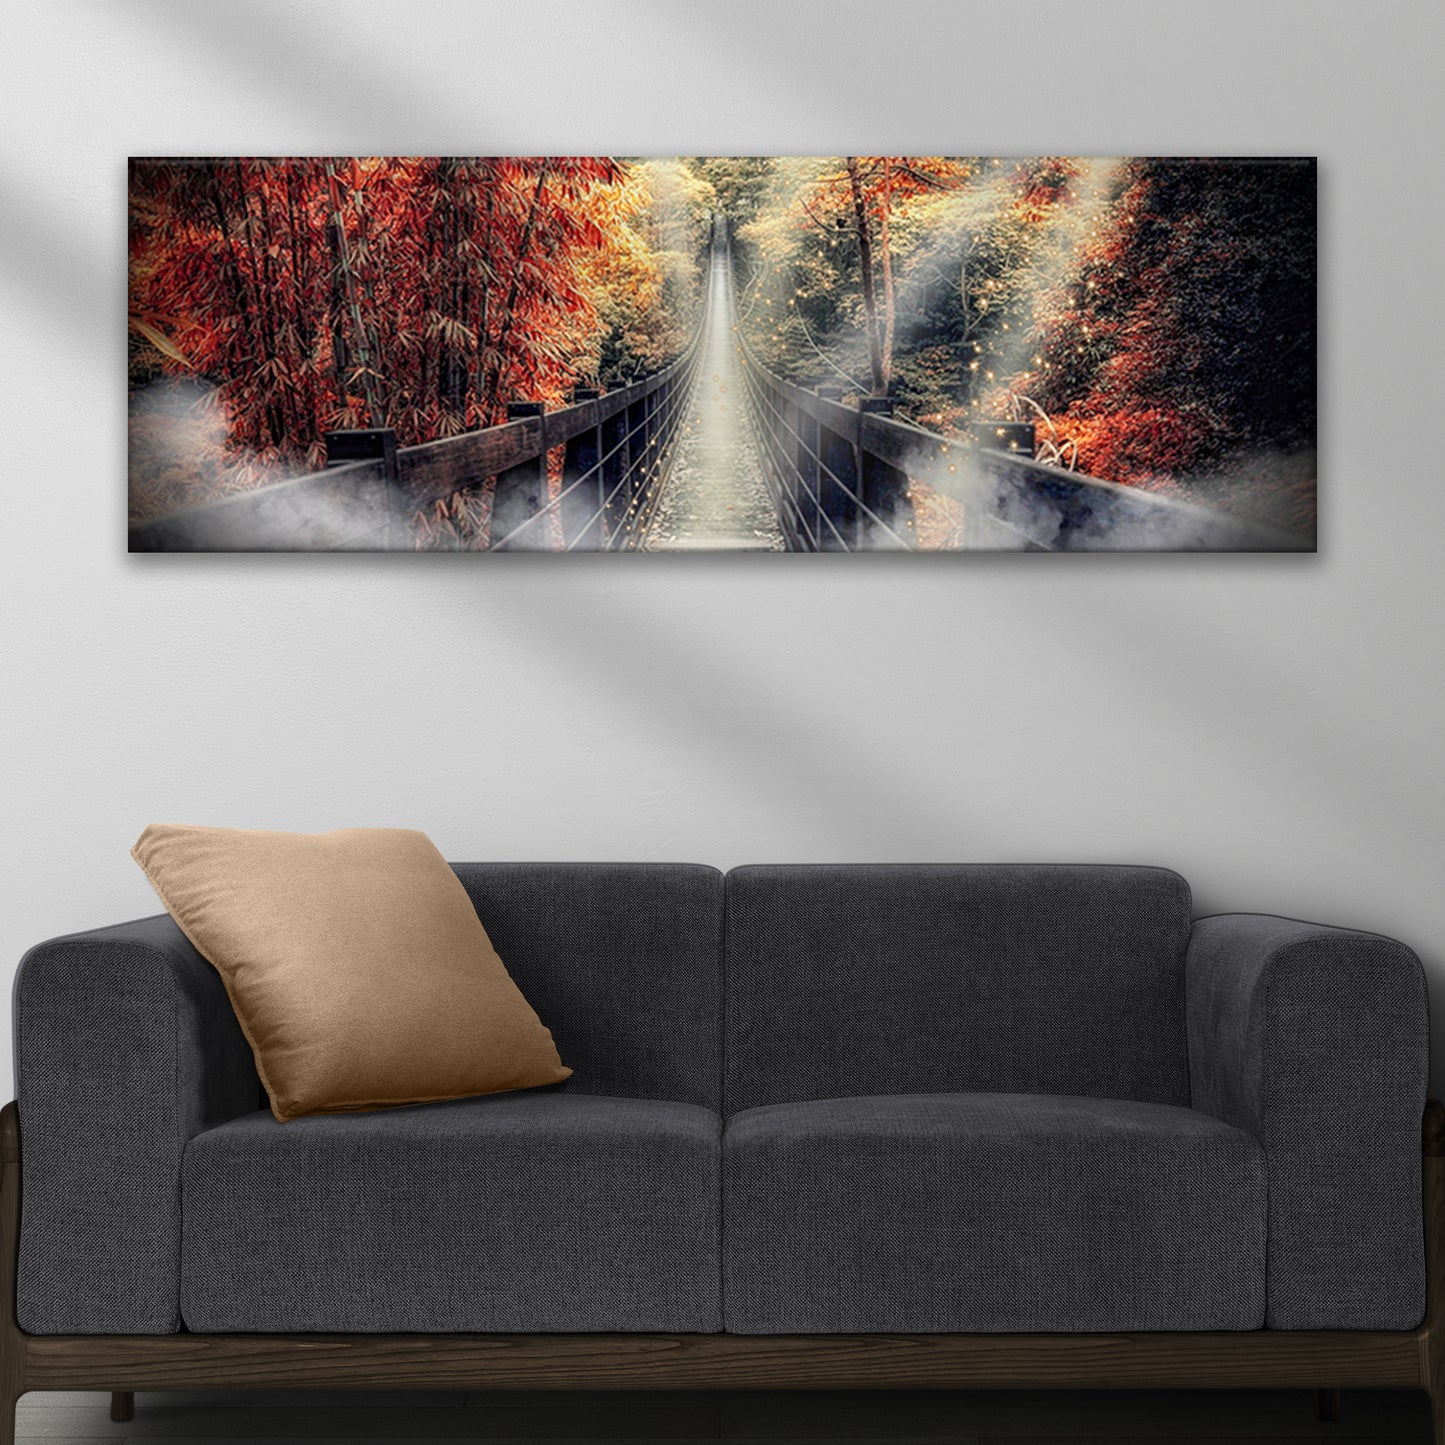 Autumn Walk On A Footbridge Canvas Wall Art  - Image by Tailored Canvases